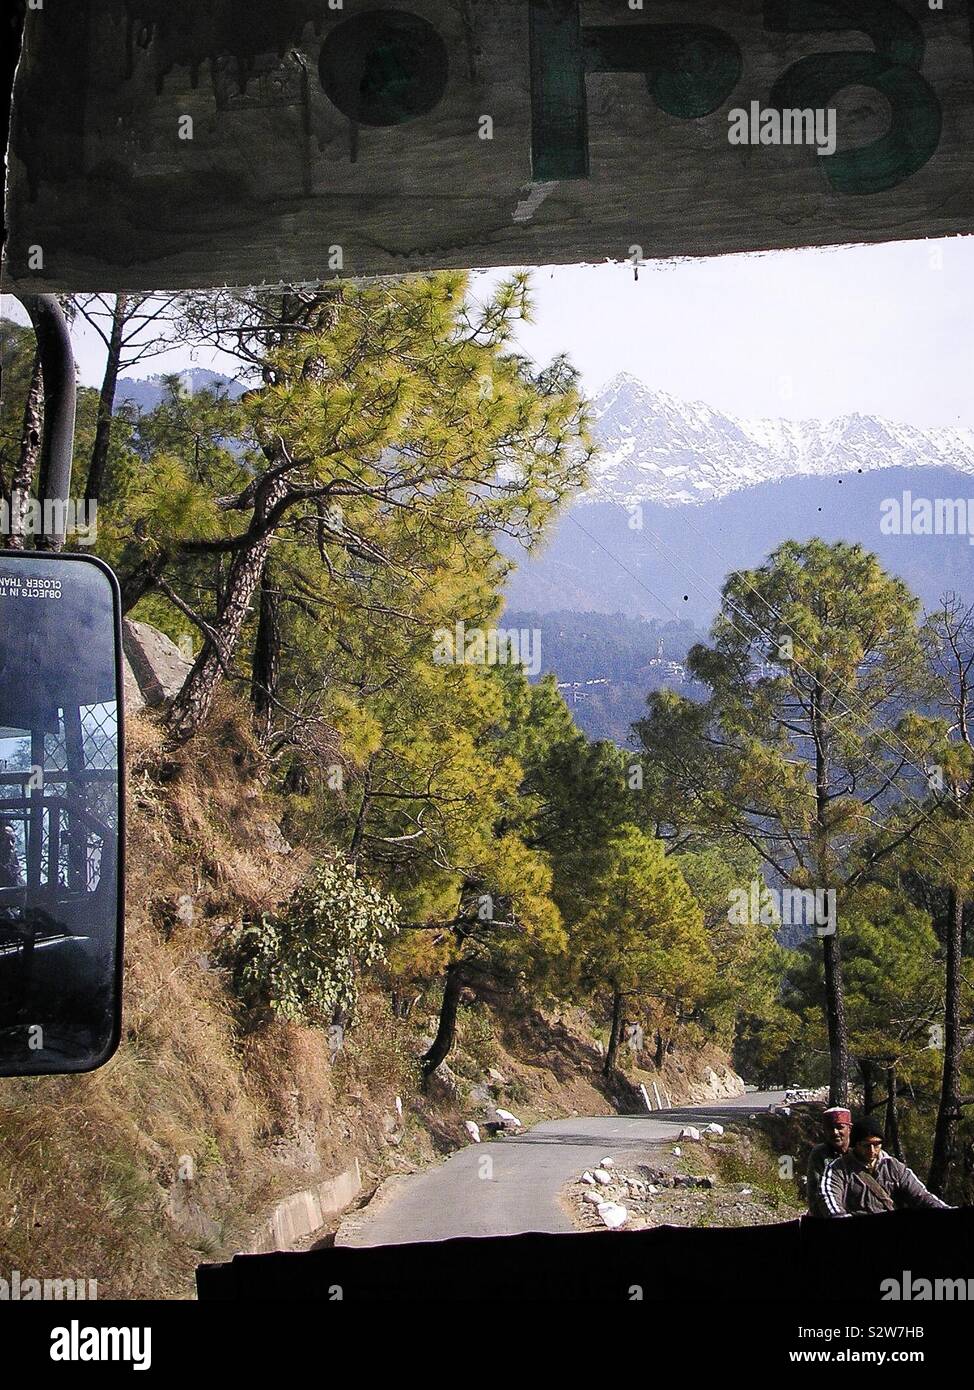 A wild bus ride down a winding mountain road in Dharamsala, Himachal Pradesh, north India Stock Photo